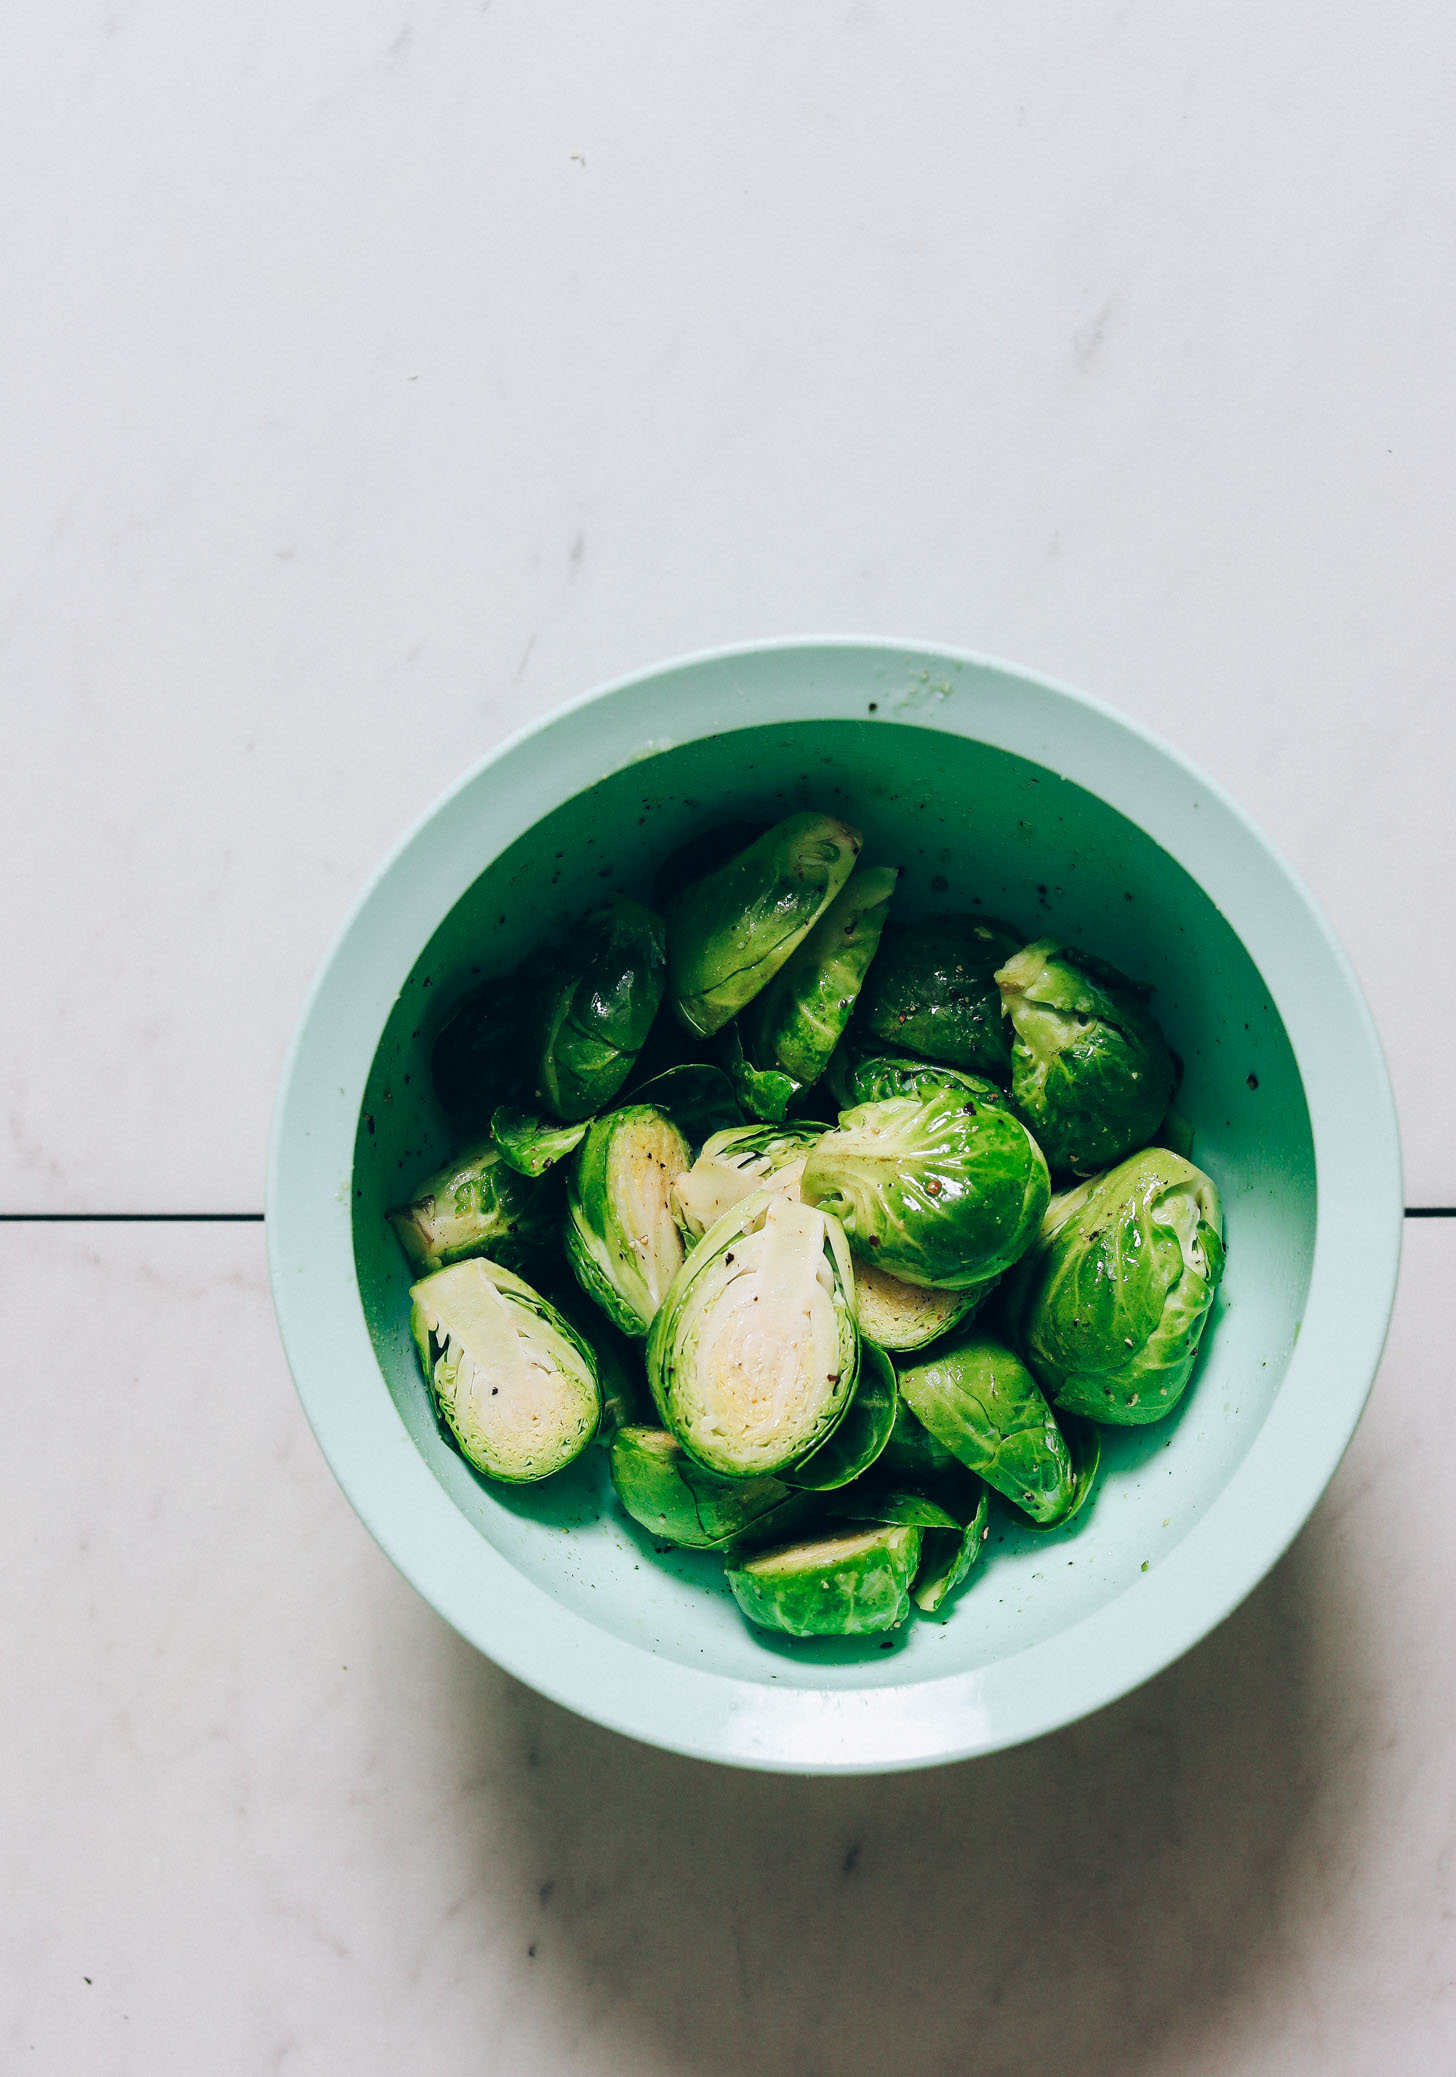 Bowl of halved brussels sprouts with oil and seasonings